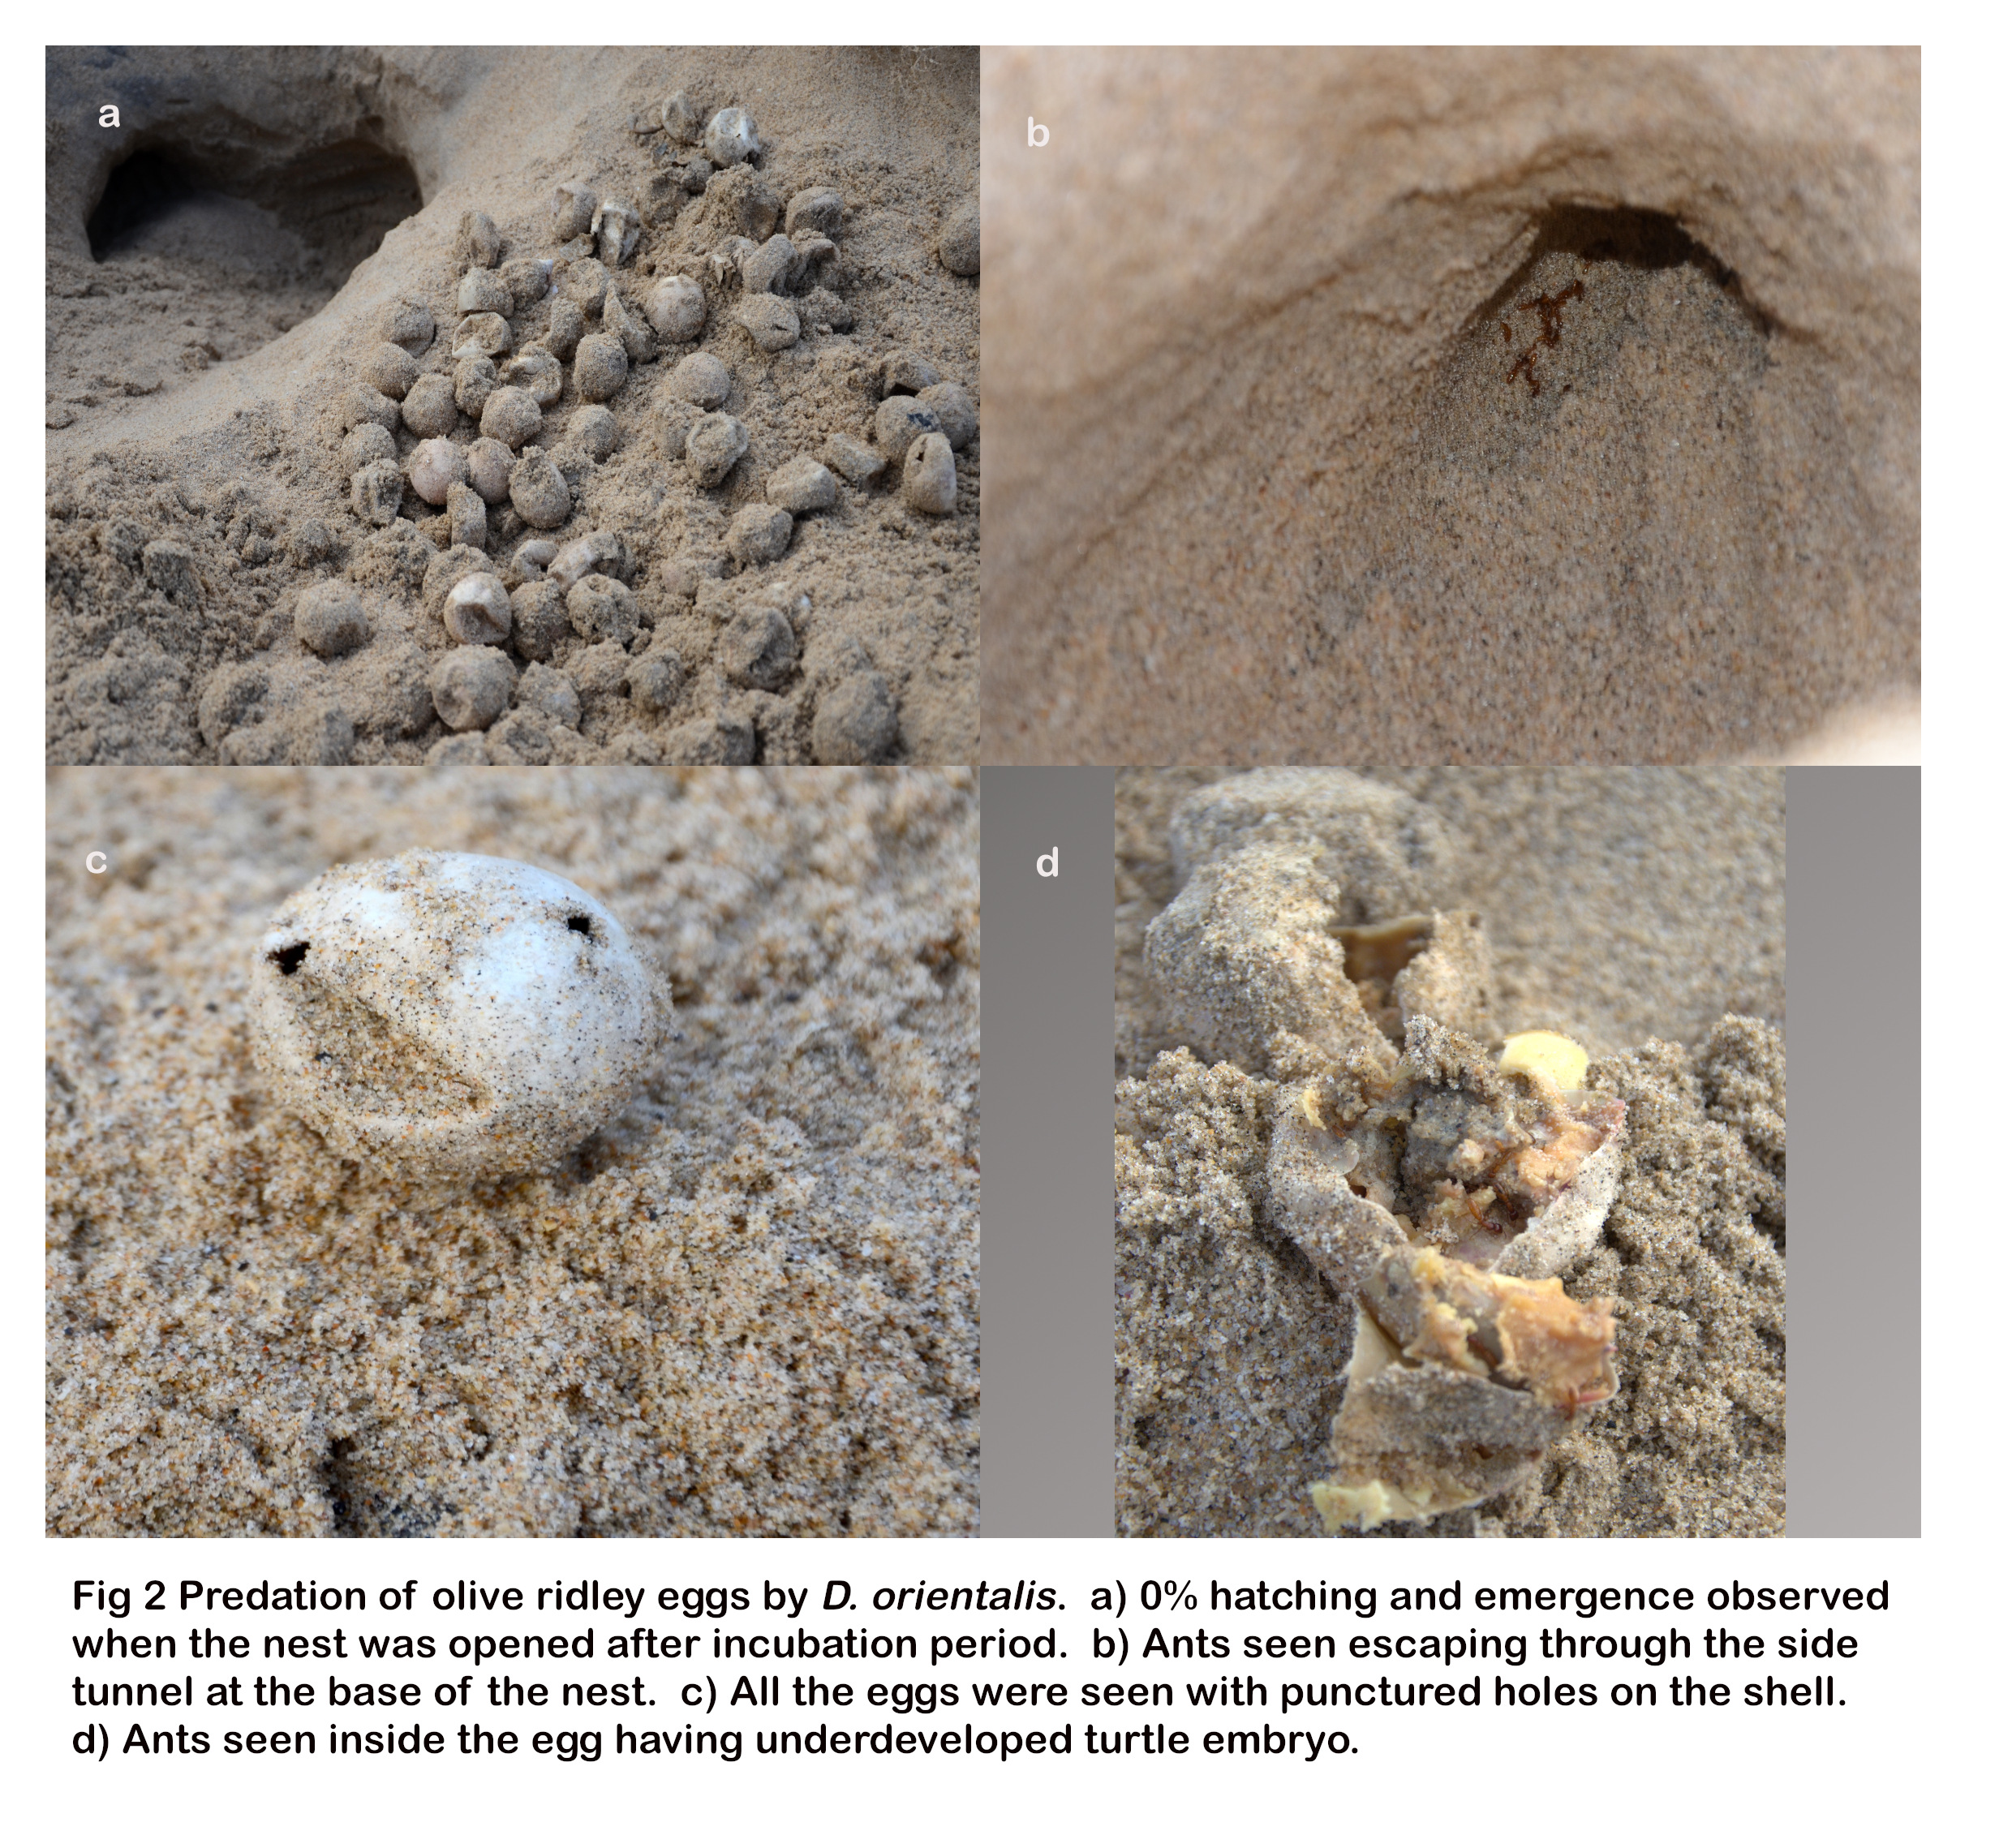 Predatory Ants First Report On Direct Evidence Of Predation By Dorylus Orientalis Westwood 15 On Olive Ridley Eggs From India V1 Preprints